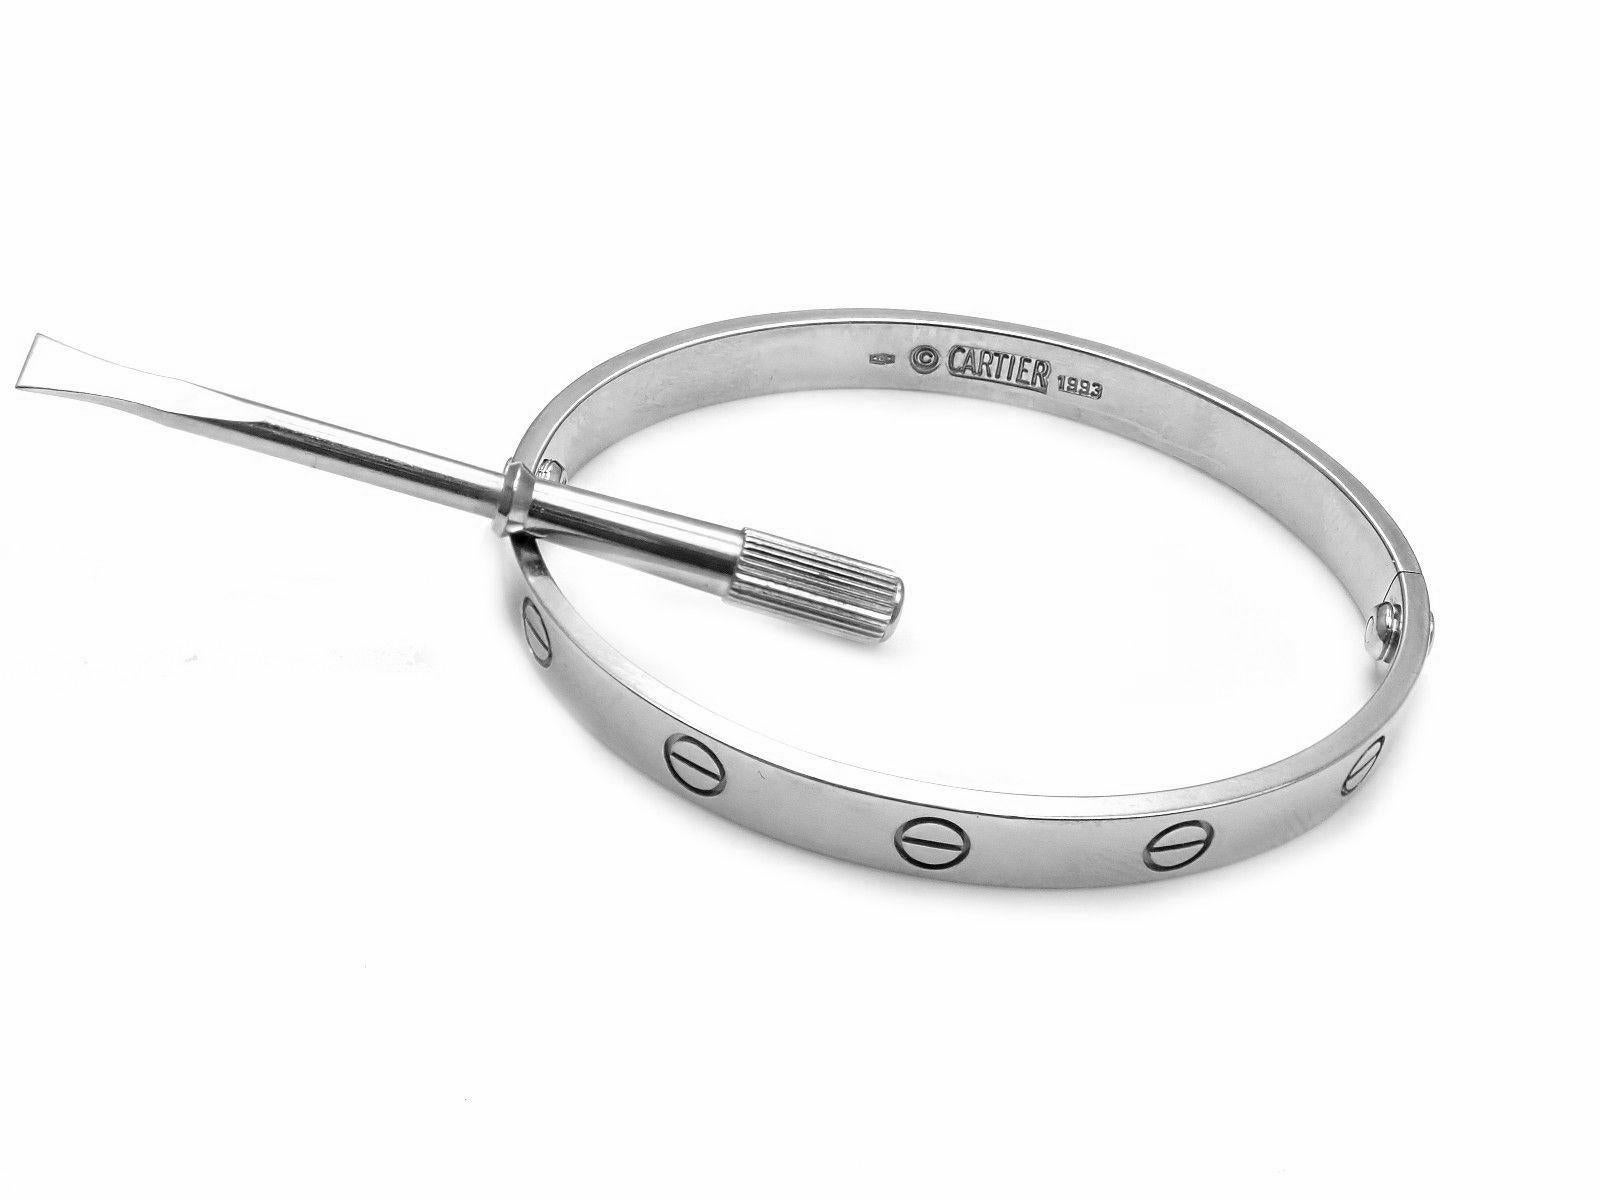 18k White Gold Love Bangle Bracelet by Cartier. Size 17. 
This bracelet comes with Cartier certificate, Cartier box and Cartier screwdriver.
Details: Size: 17 
Weight: 33.2 grams
Width: 6.5mm 
Hallmarks: Cartier 750 17 1993 135860
*Free Shipping